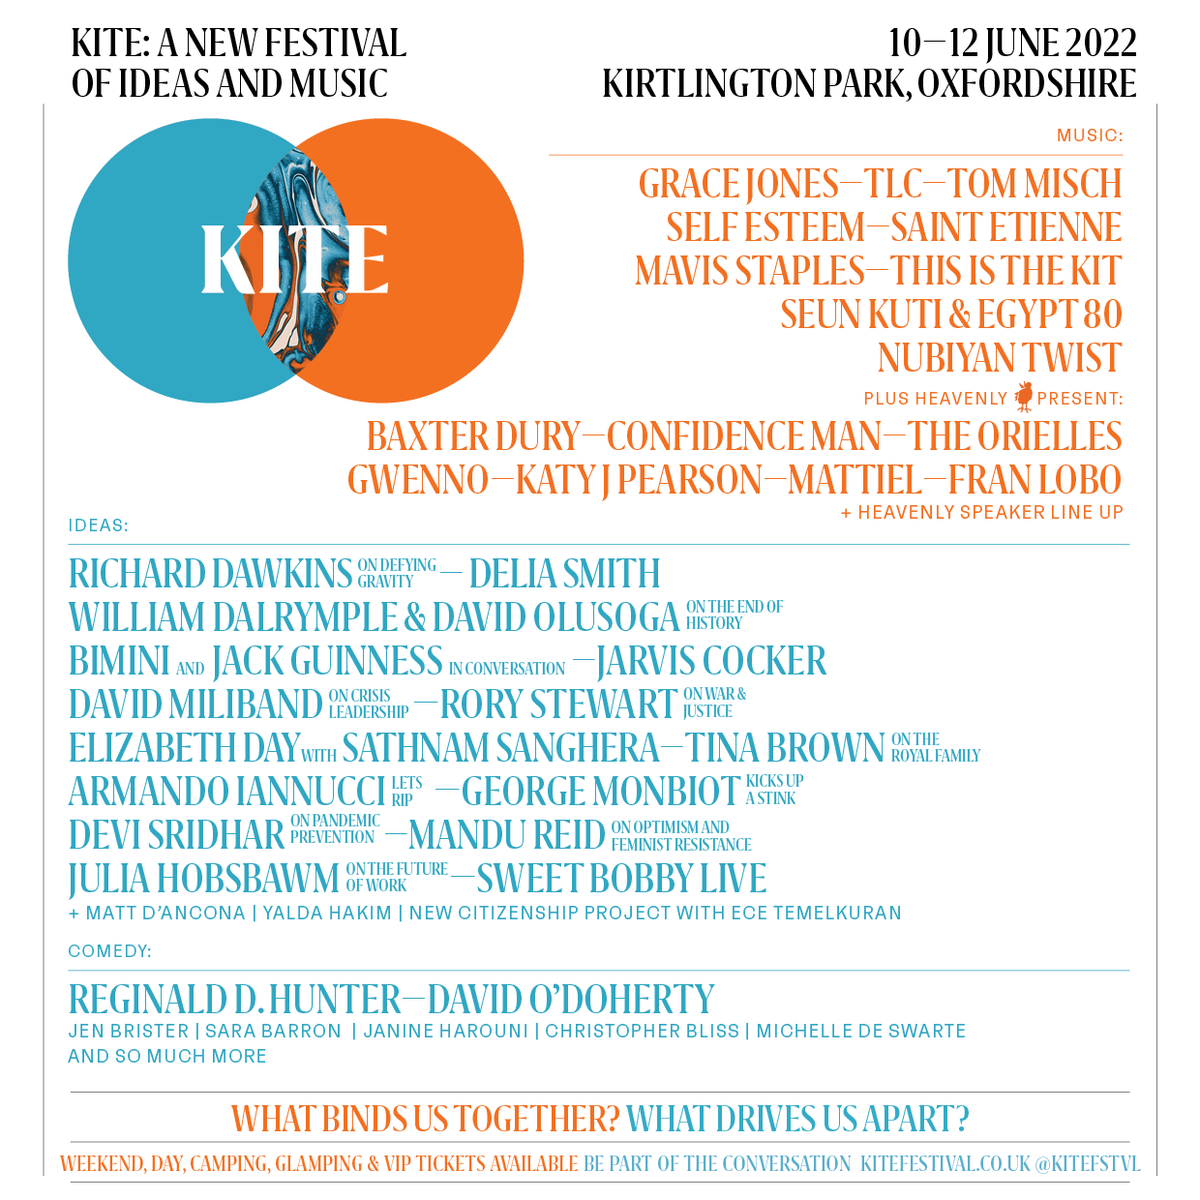 Announcing new music acts & a whole host of new speakers to the KITE line up, including @biminibabes, @SELFESTEEM___ , and @RichardDawkins. They join the already announced @gracejones, @DMiliband, @OfficialTLC, @TinaBrownLM & so many more. kitefestival.co.uk